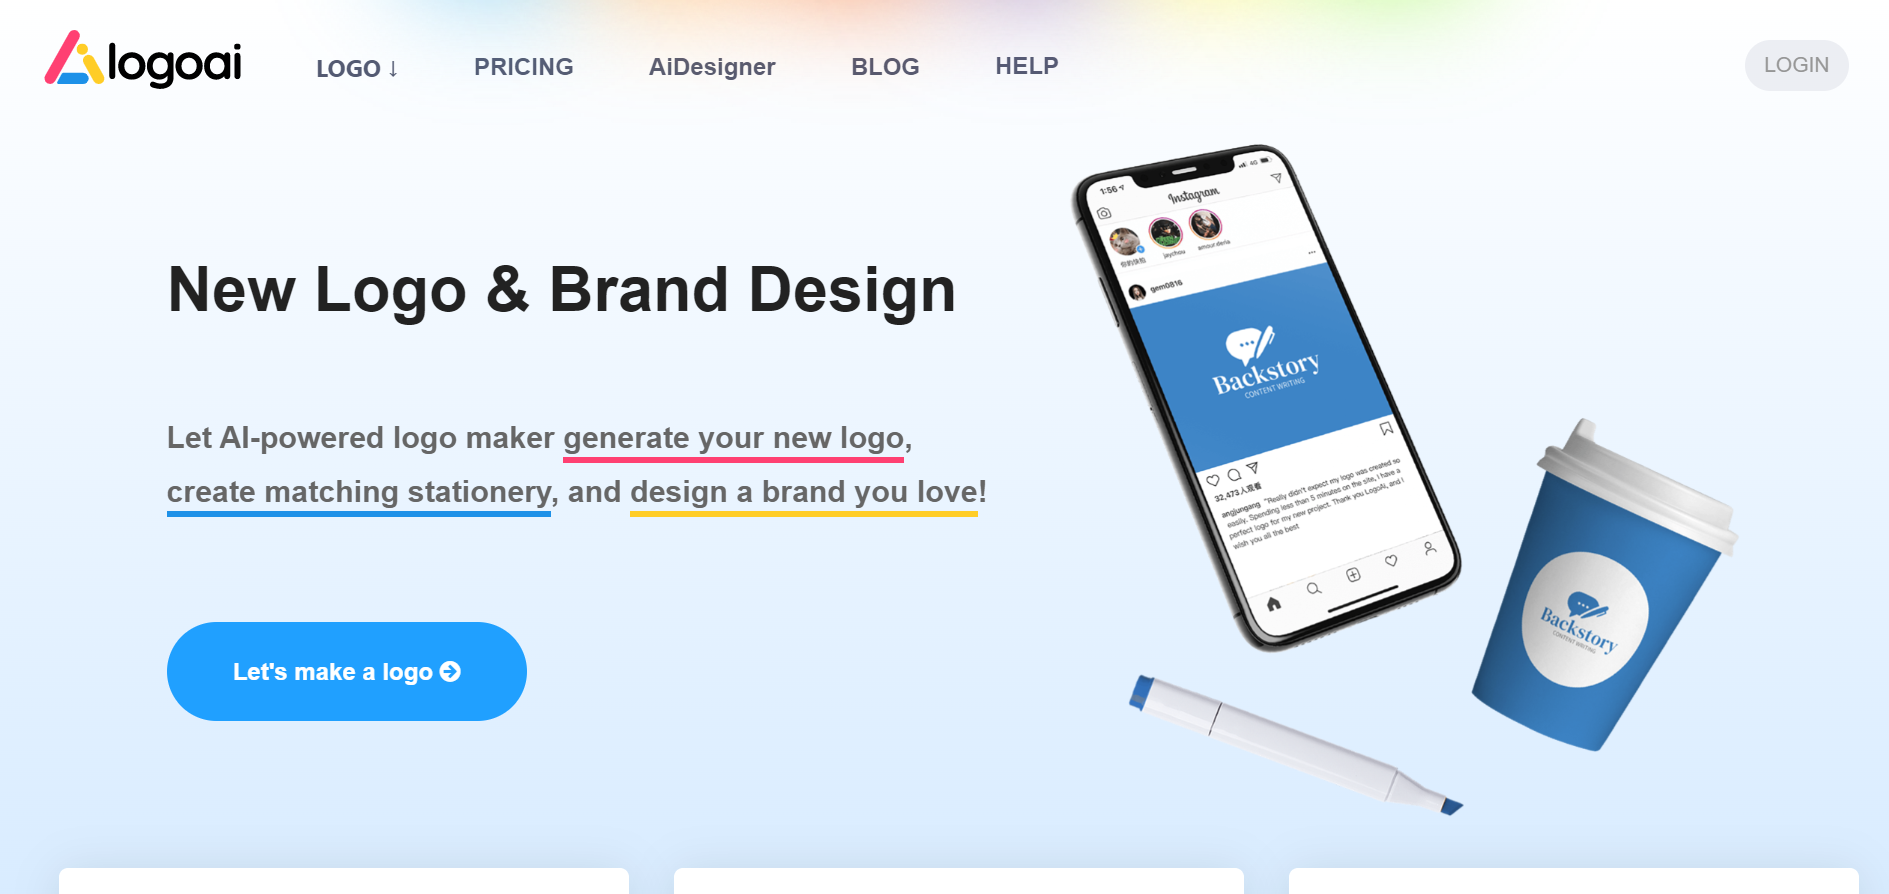 Unlock Your Brand’s Potential: LogoAI.com Creates Jaw-Dropping Logos with a Touch of AI Magic!